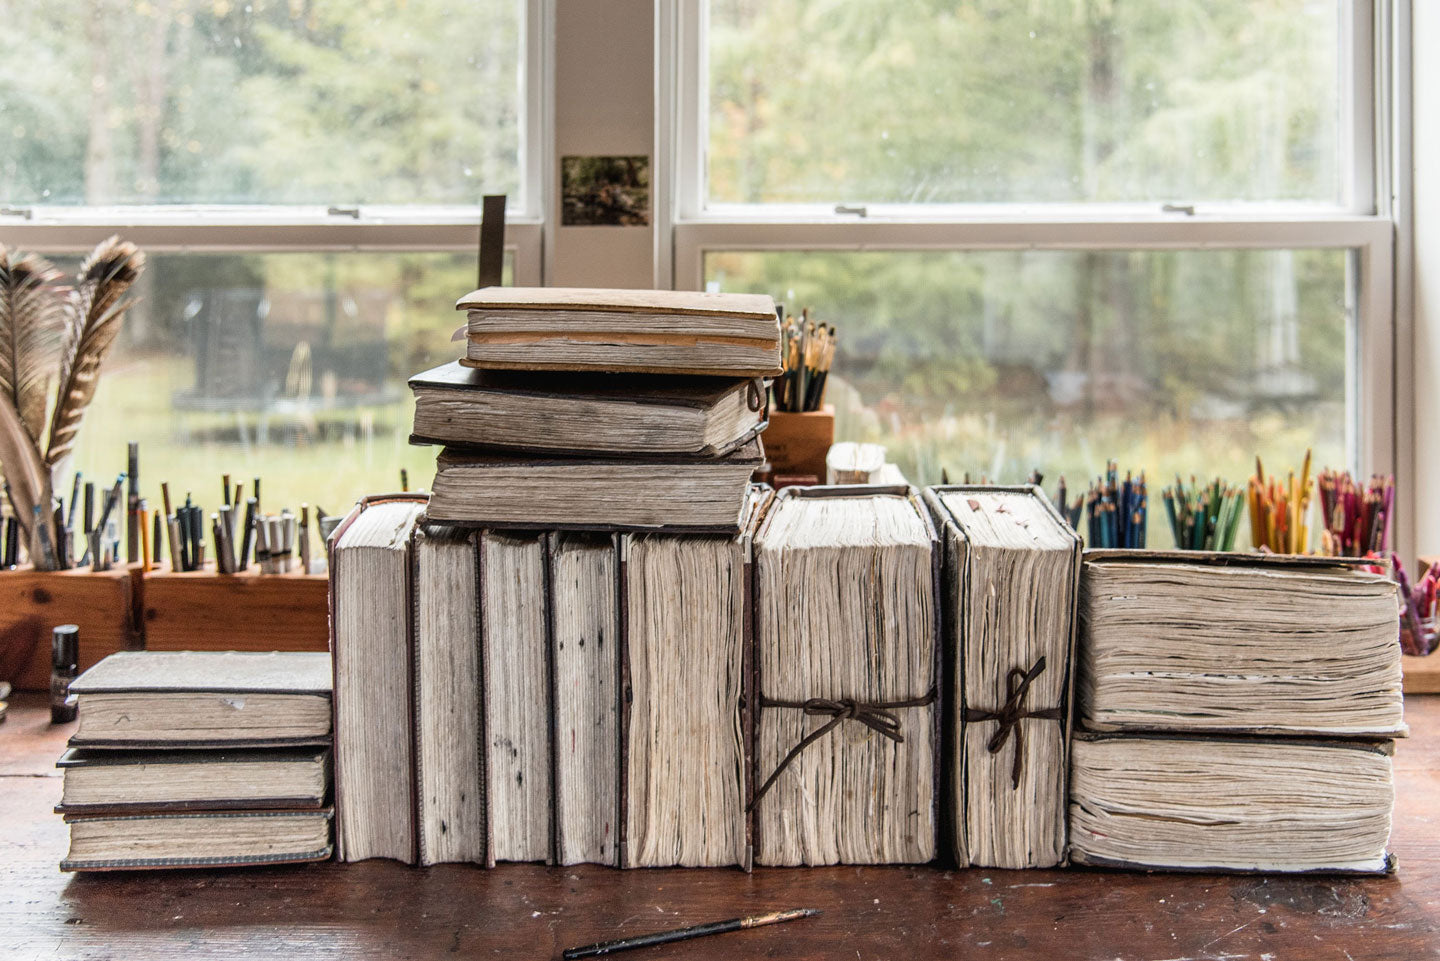 The well-worn pages of a collection handbound journals by Peg and Awl